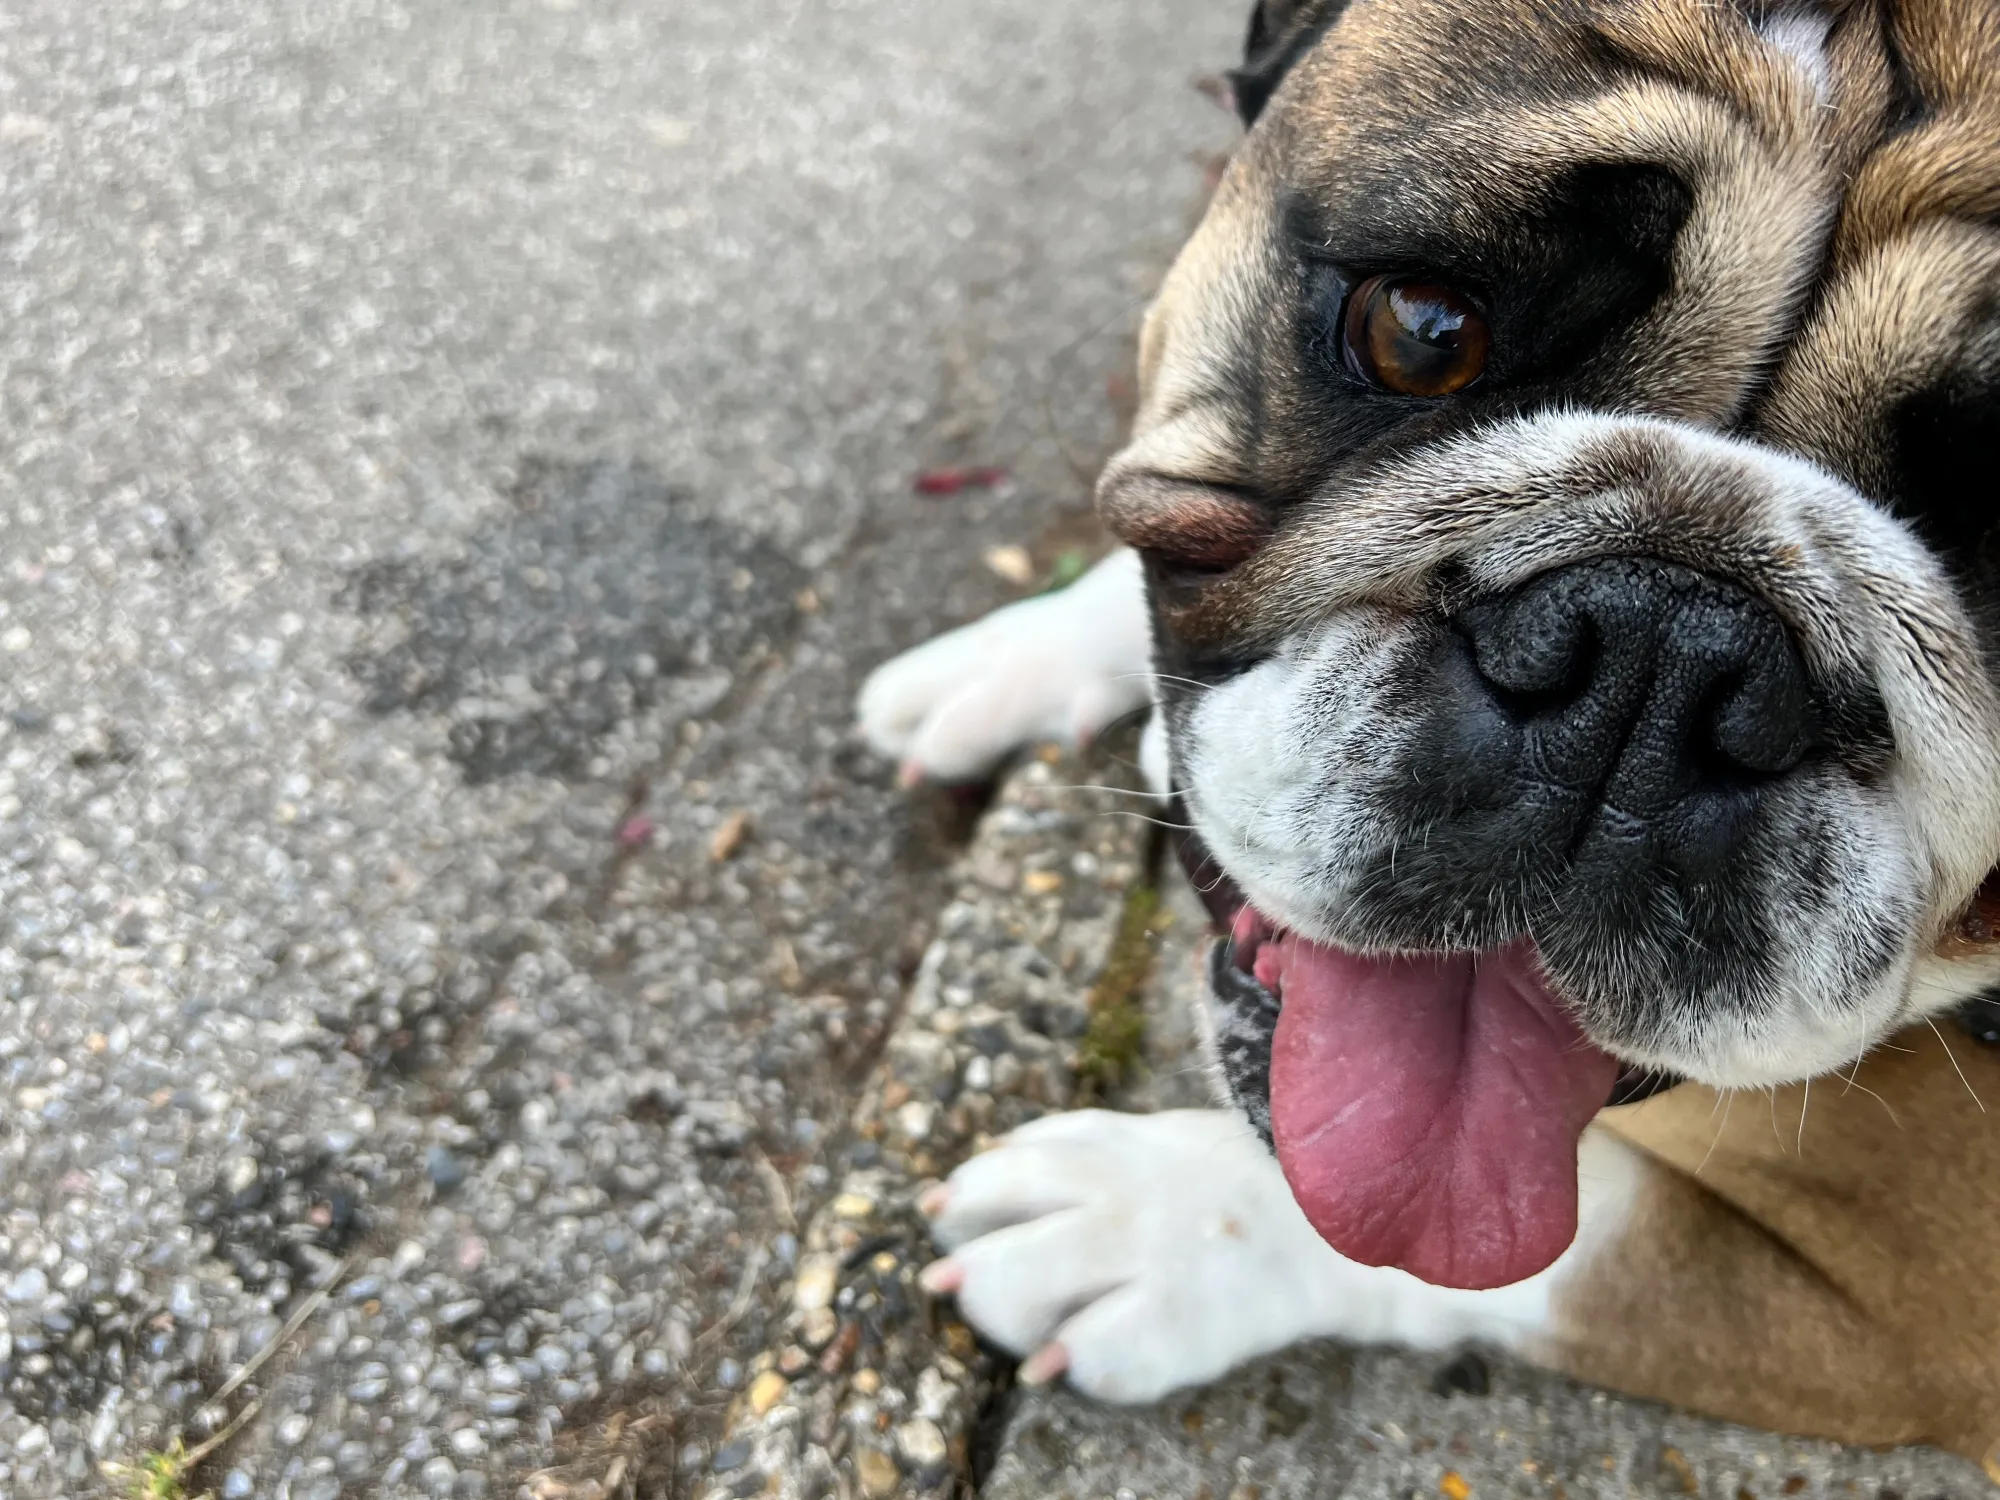 This is Luna, an English Bulldog who has drooled on the floor - do english bulldogs drool